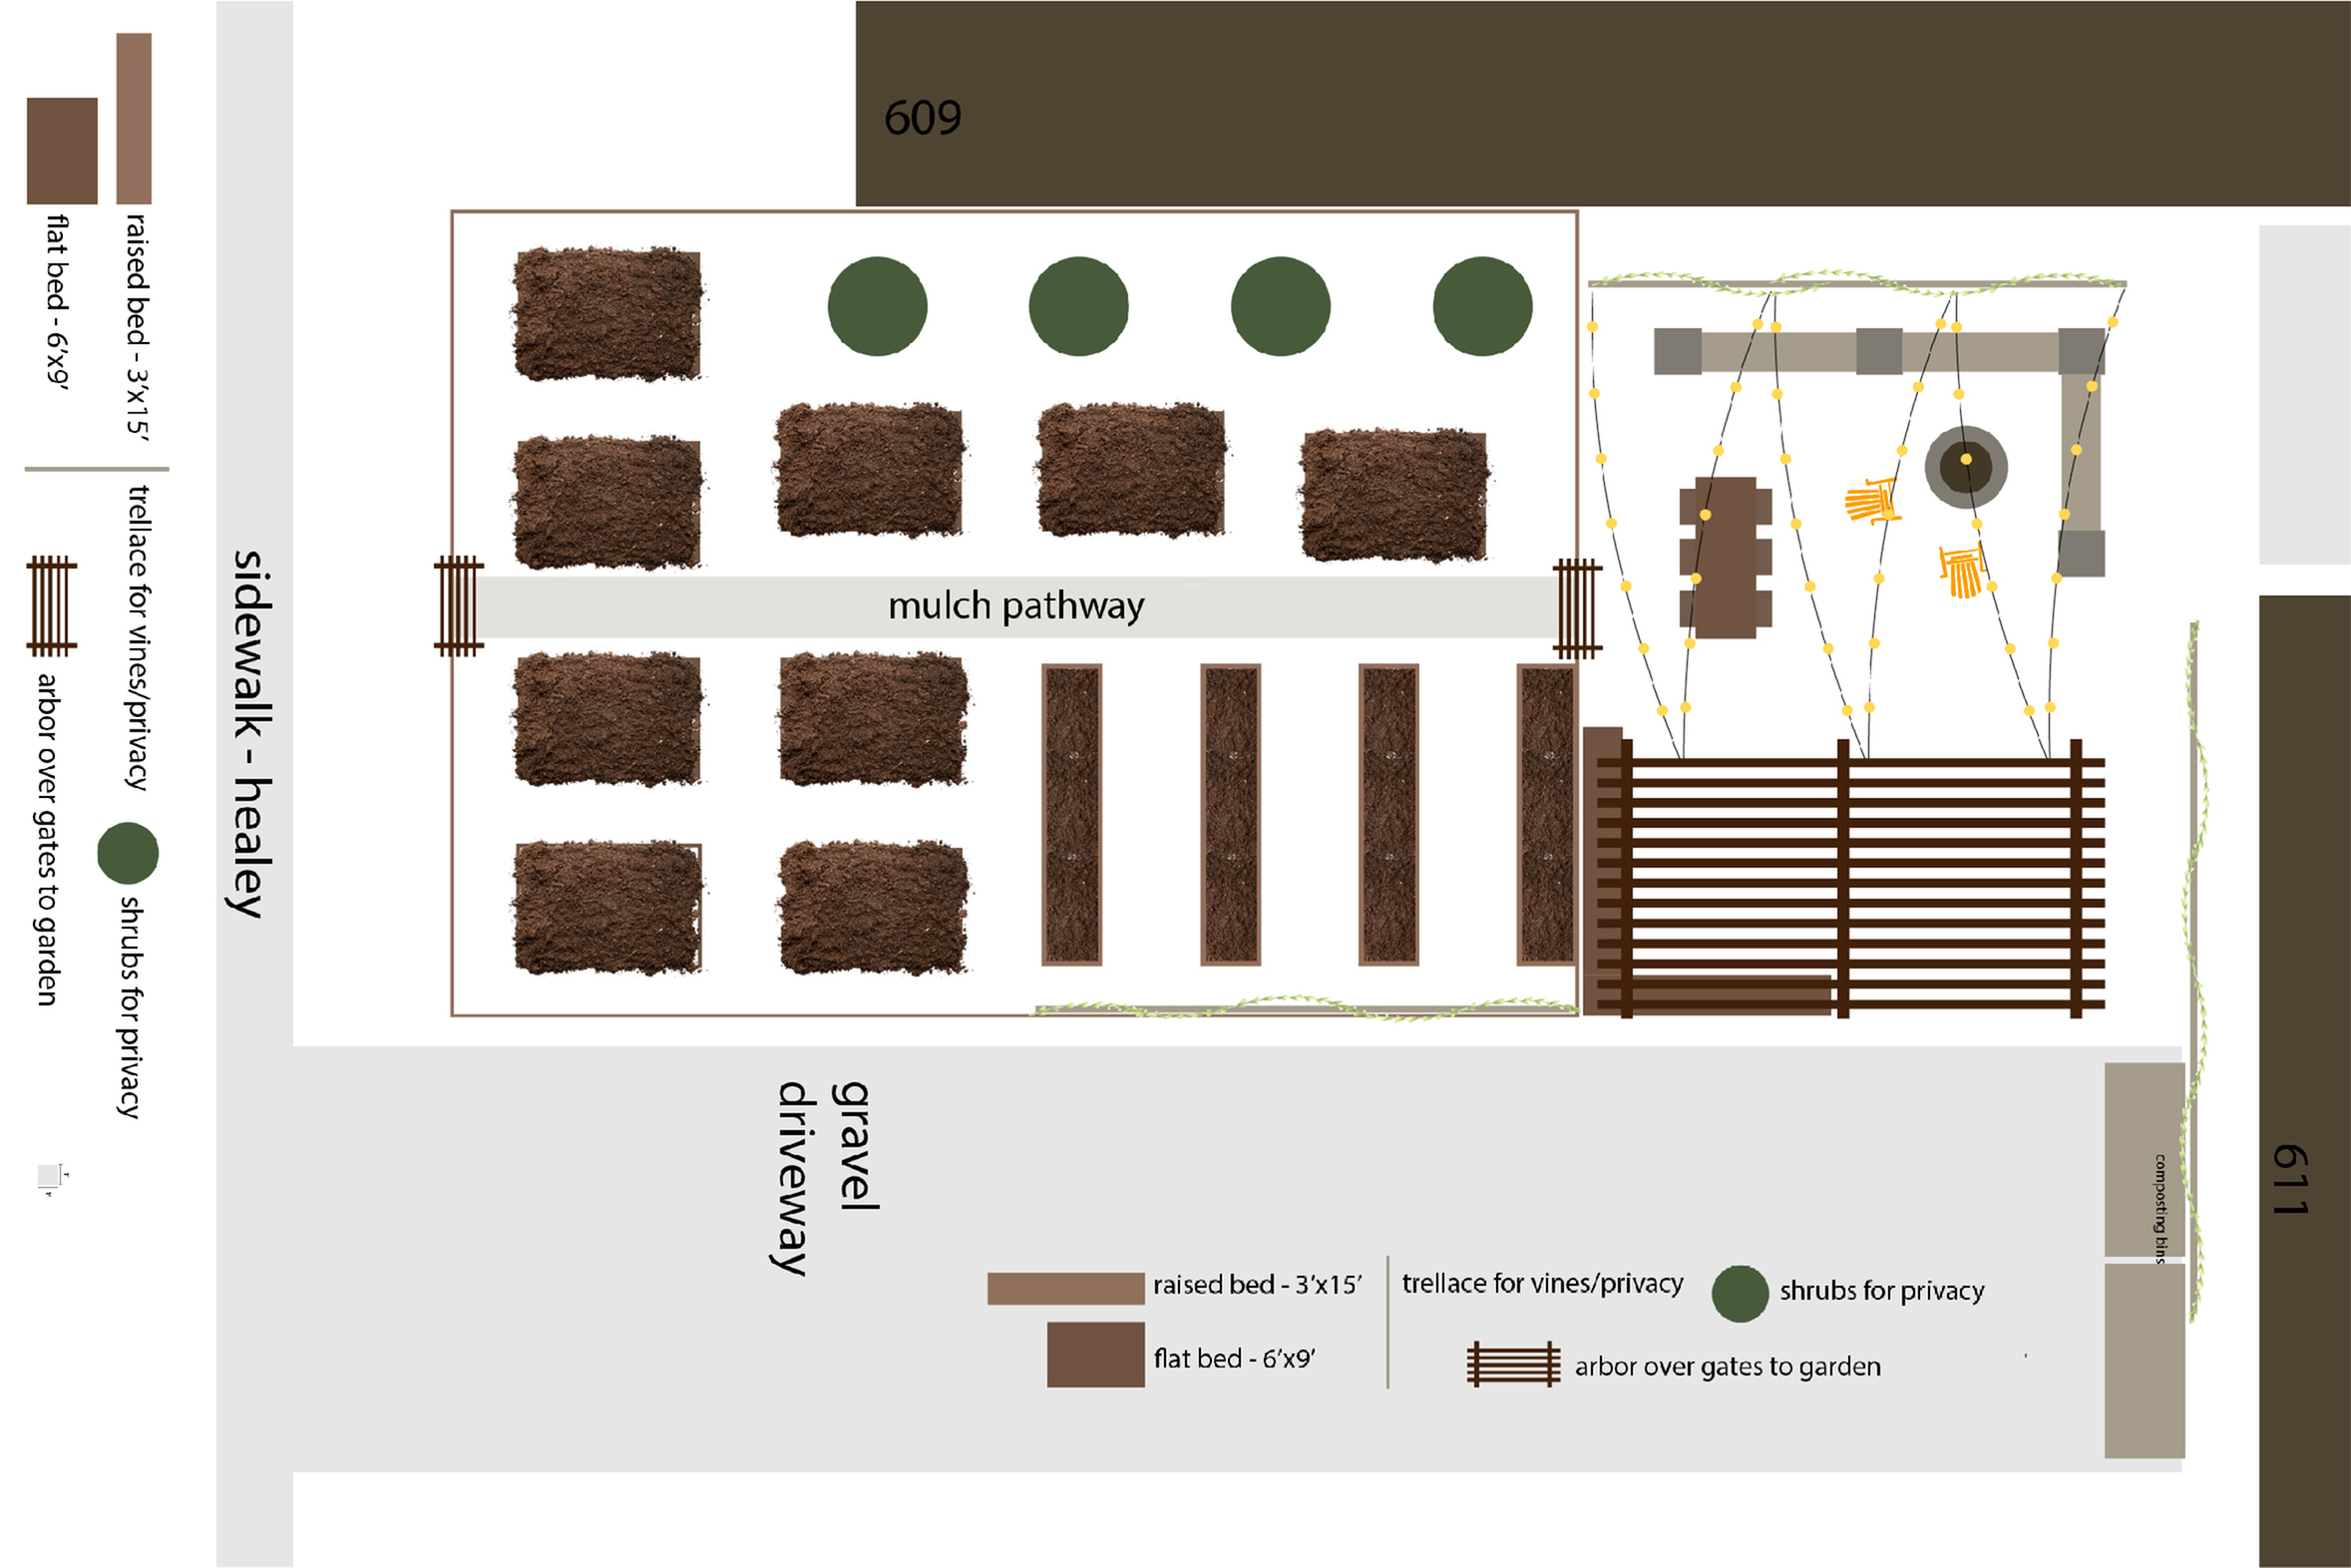 Posterboard showing the proposed layout of the urban farm at 611 w. healey